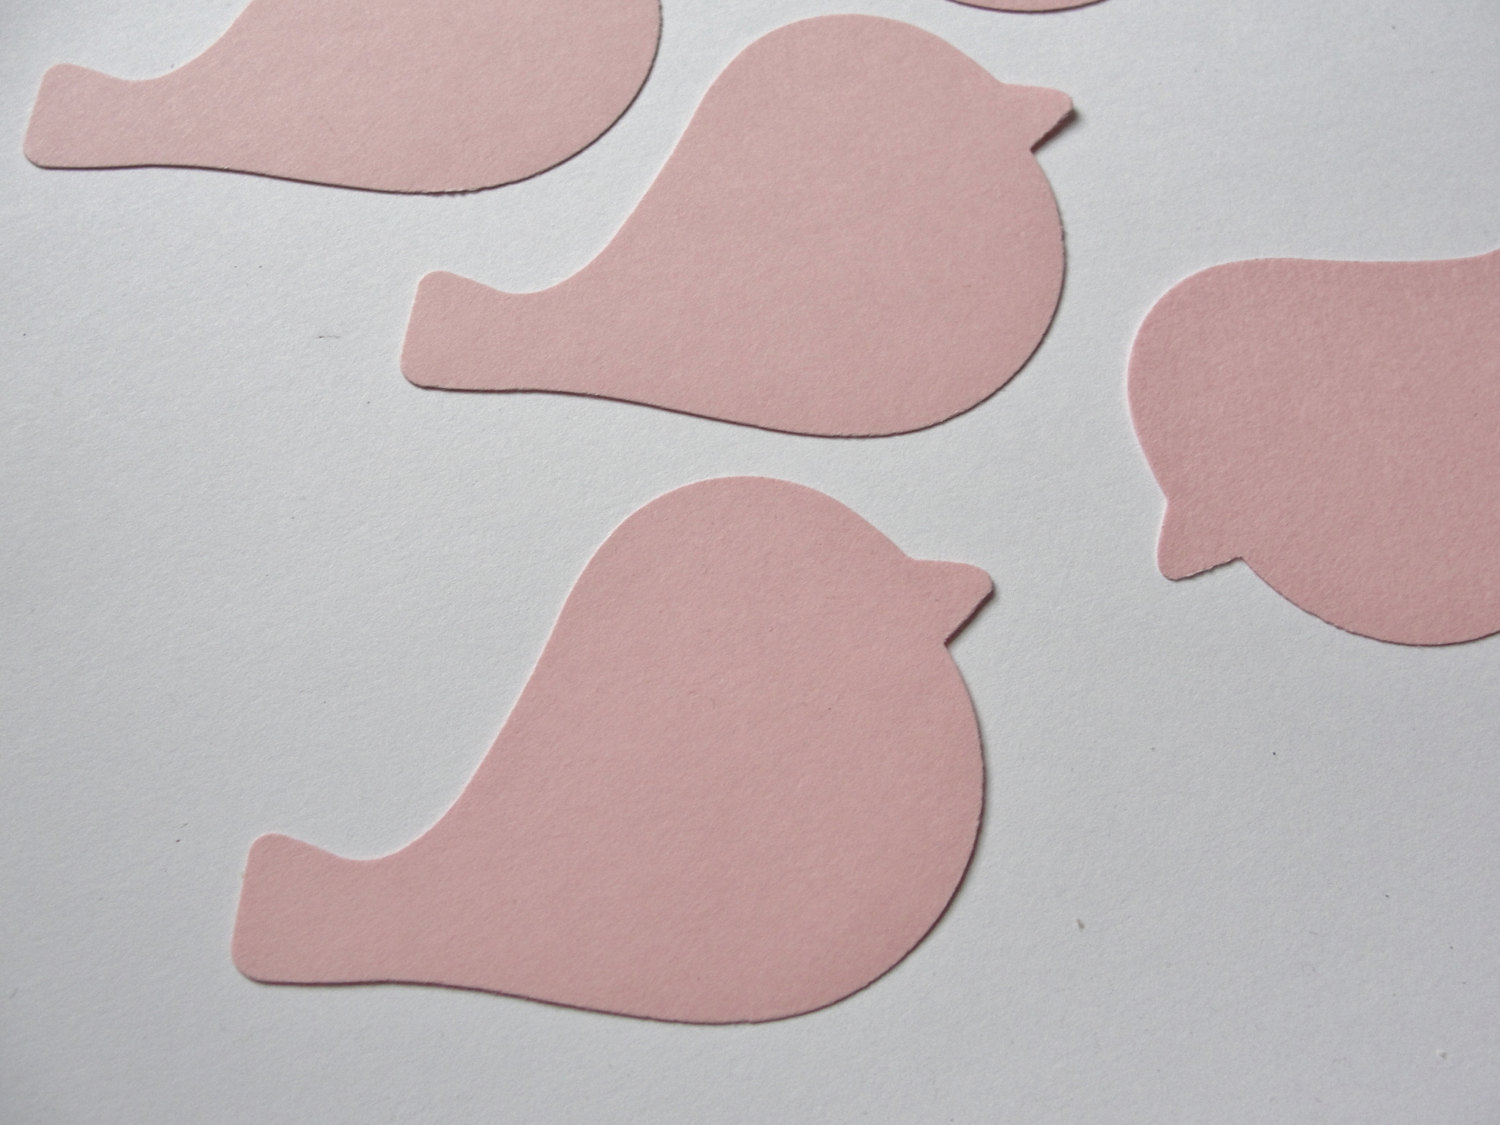 7 Best Images of Paper Bird Cutouts Printable - Free Printable Cut Out ...